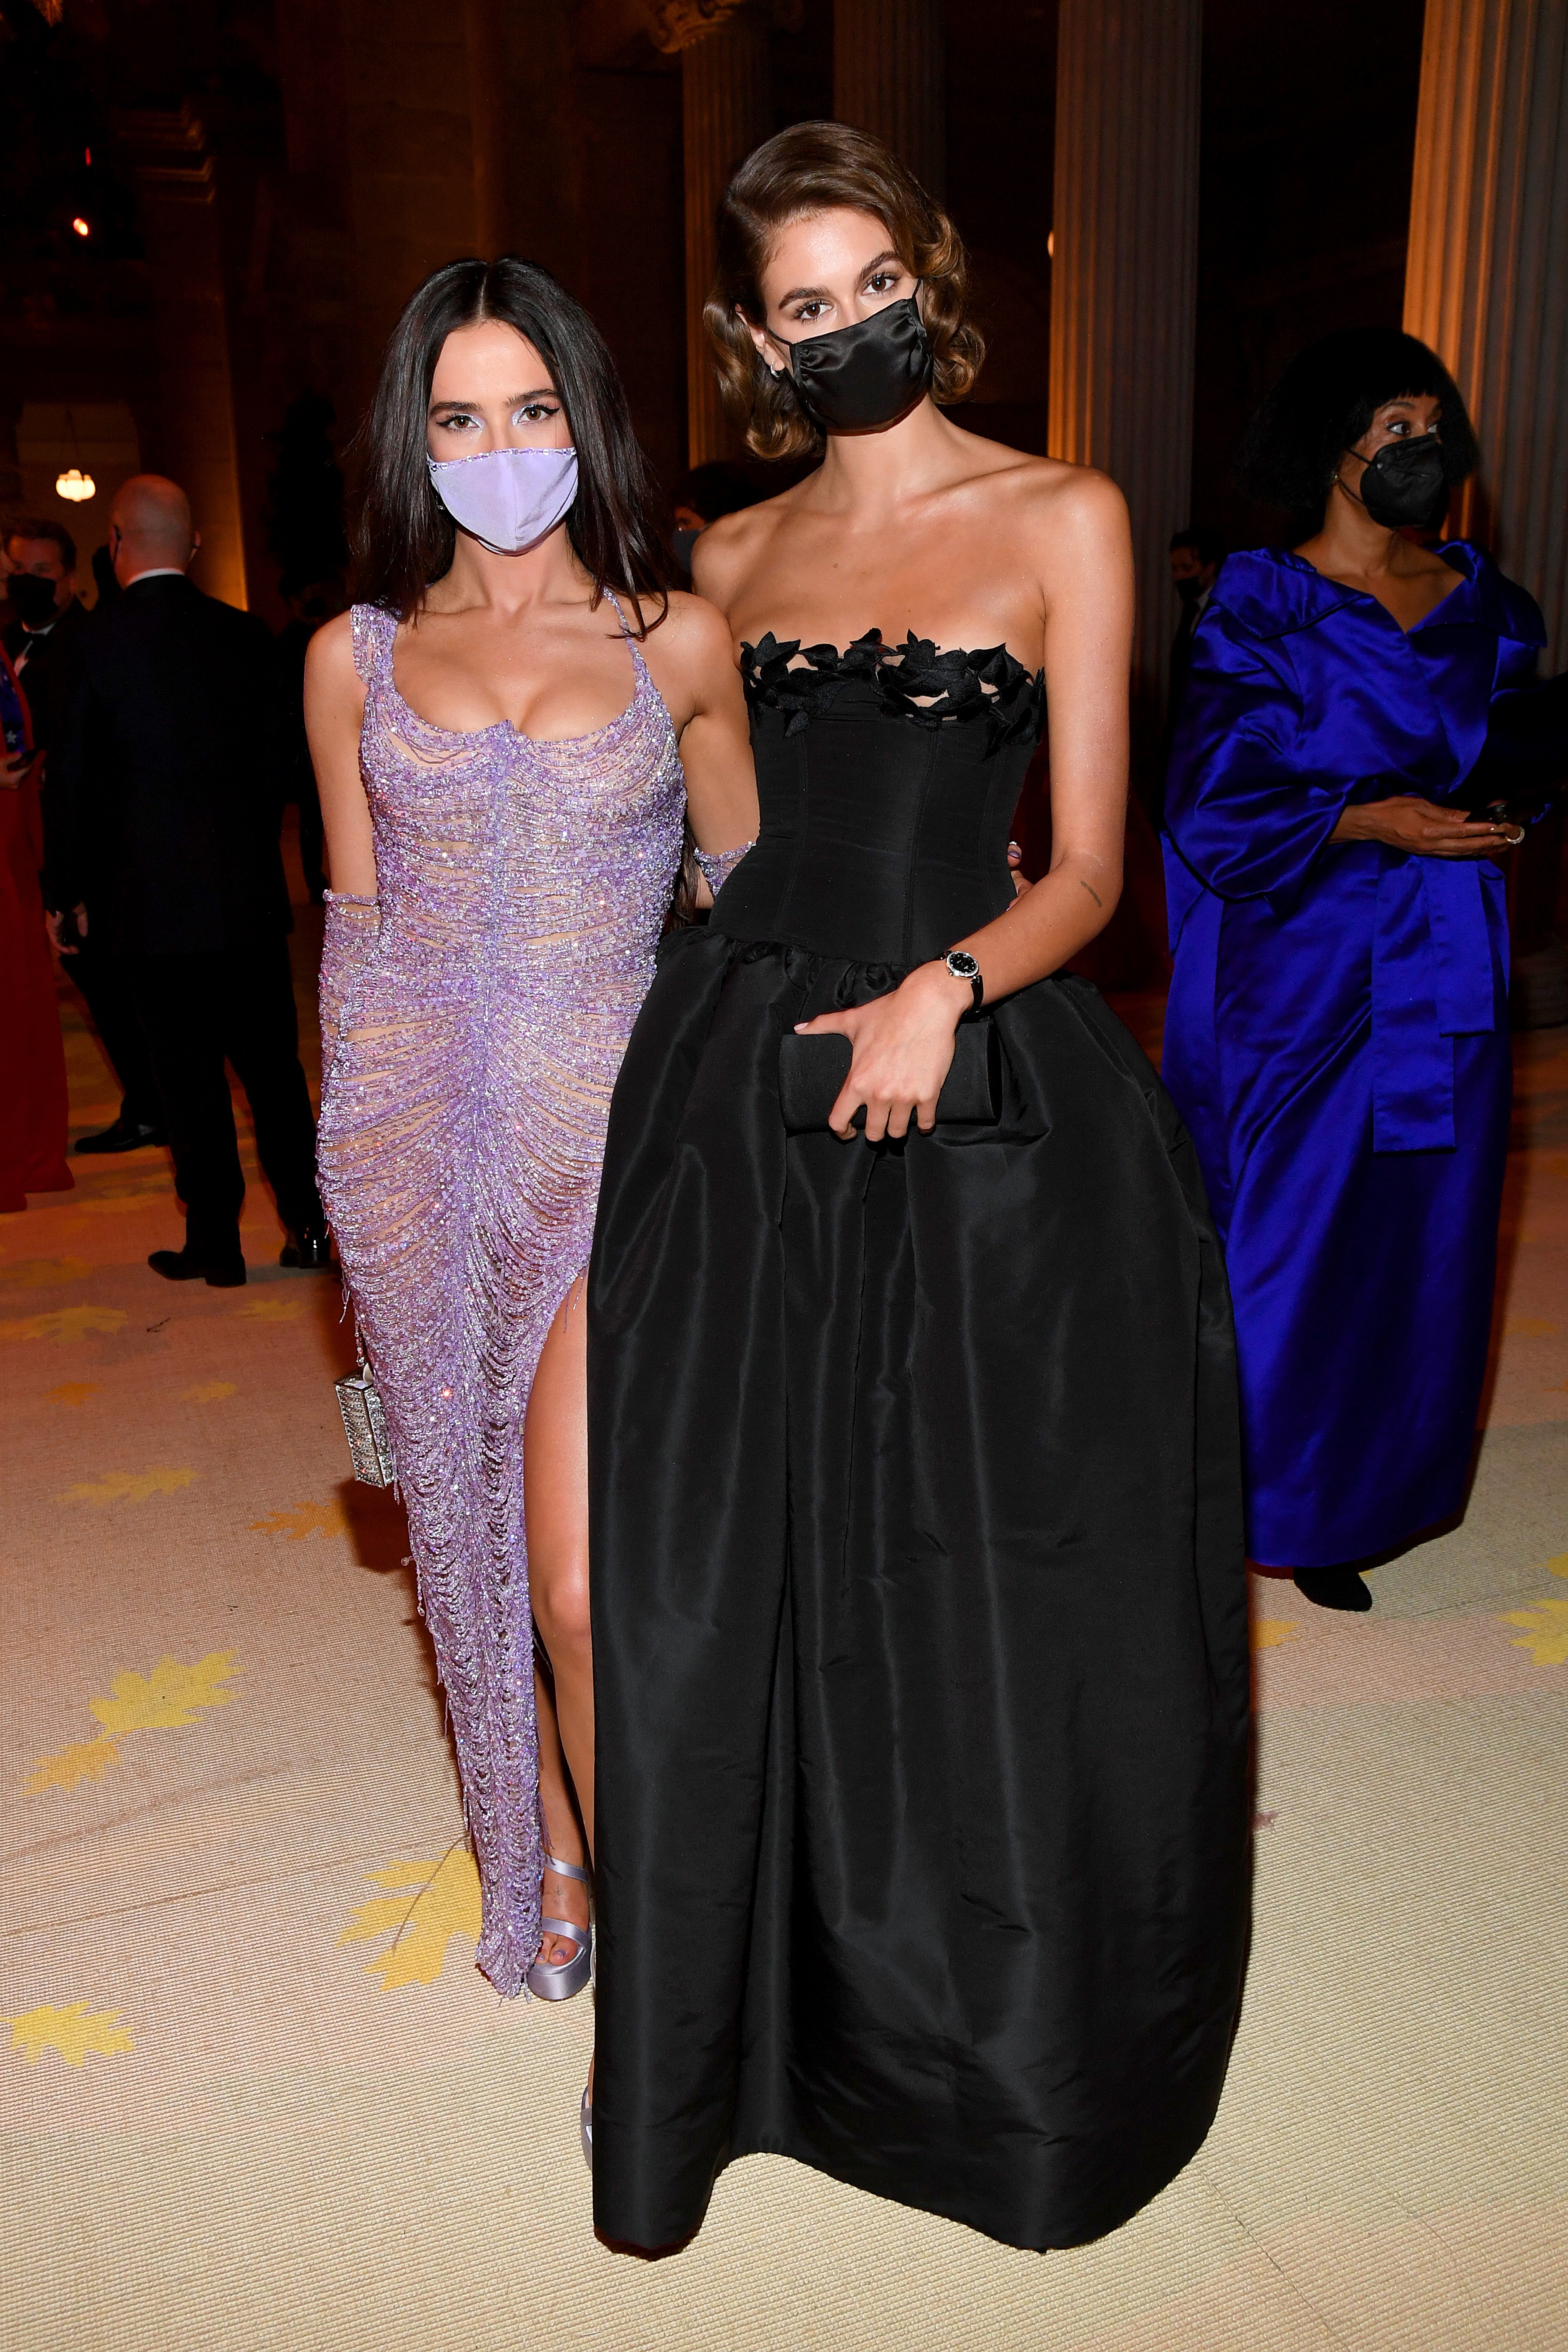 NEW YORK, NEW YORK - SEPTEMBER 13: (EXCLUSIVE COVERAGE) Zoey Deutch and Kaia Gerber attend the The 2021 Met Gala Celebrating In America: A Lexicon Of Fashion at Metropolitan Museum of Art on September 13, 2021 in New York City. (Photo by Kevin Mazur/MG21/ (Foto: Getty Images for The Met Museum/)